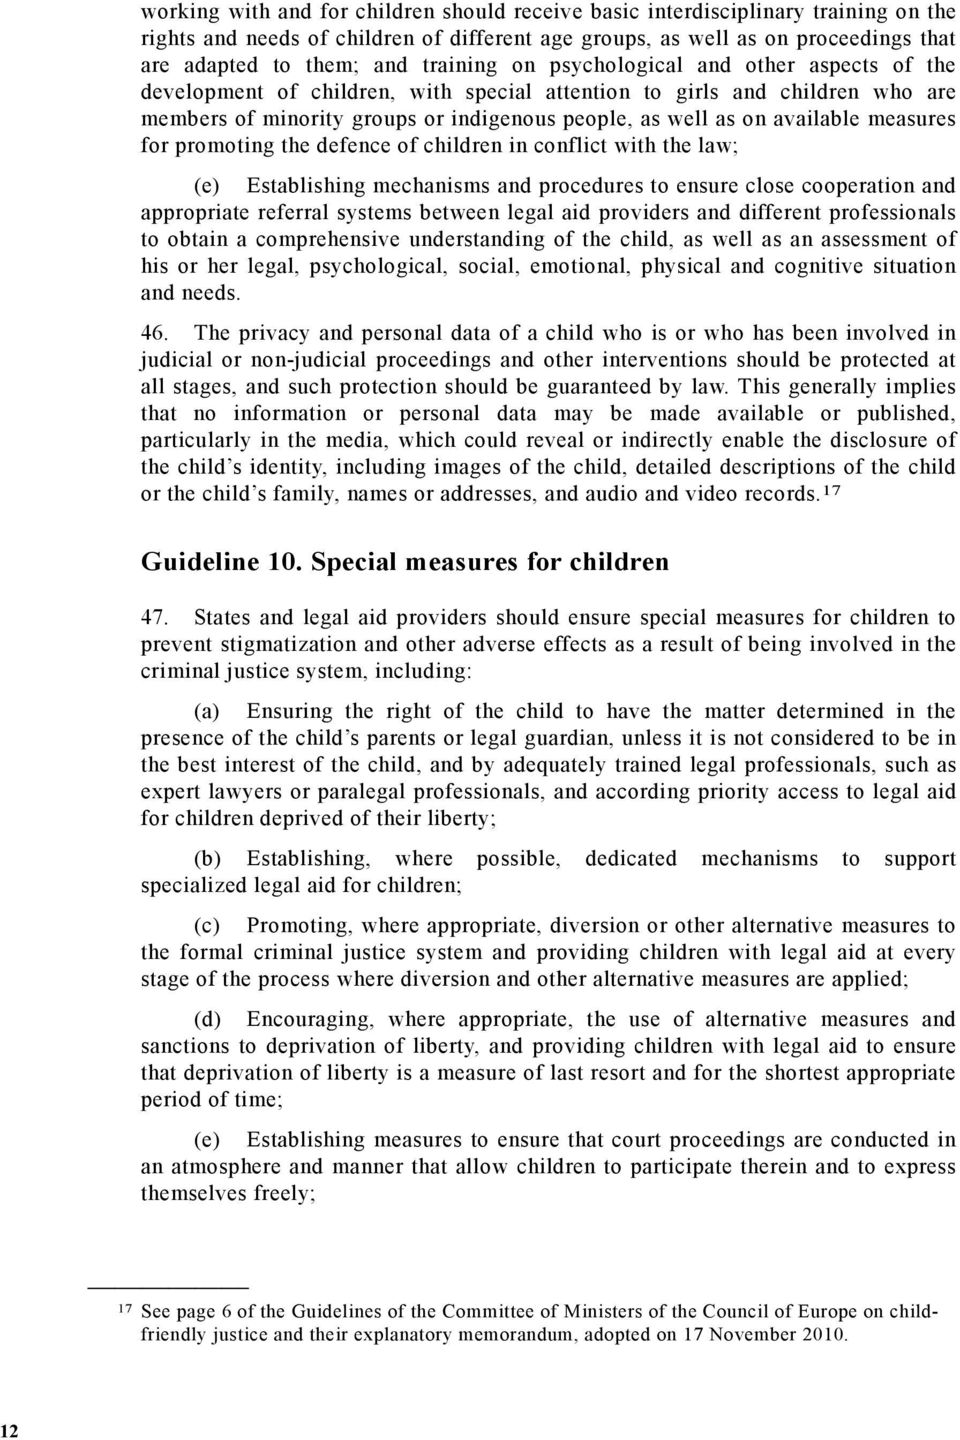 available measures for promoting the defence of children in conflict with the law; (e) Establishing mechanisms and procedures to ensure close cooperation and appropriate referral systems between